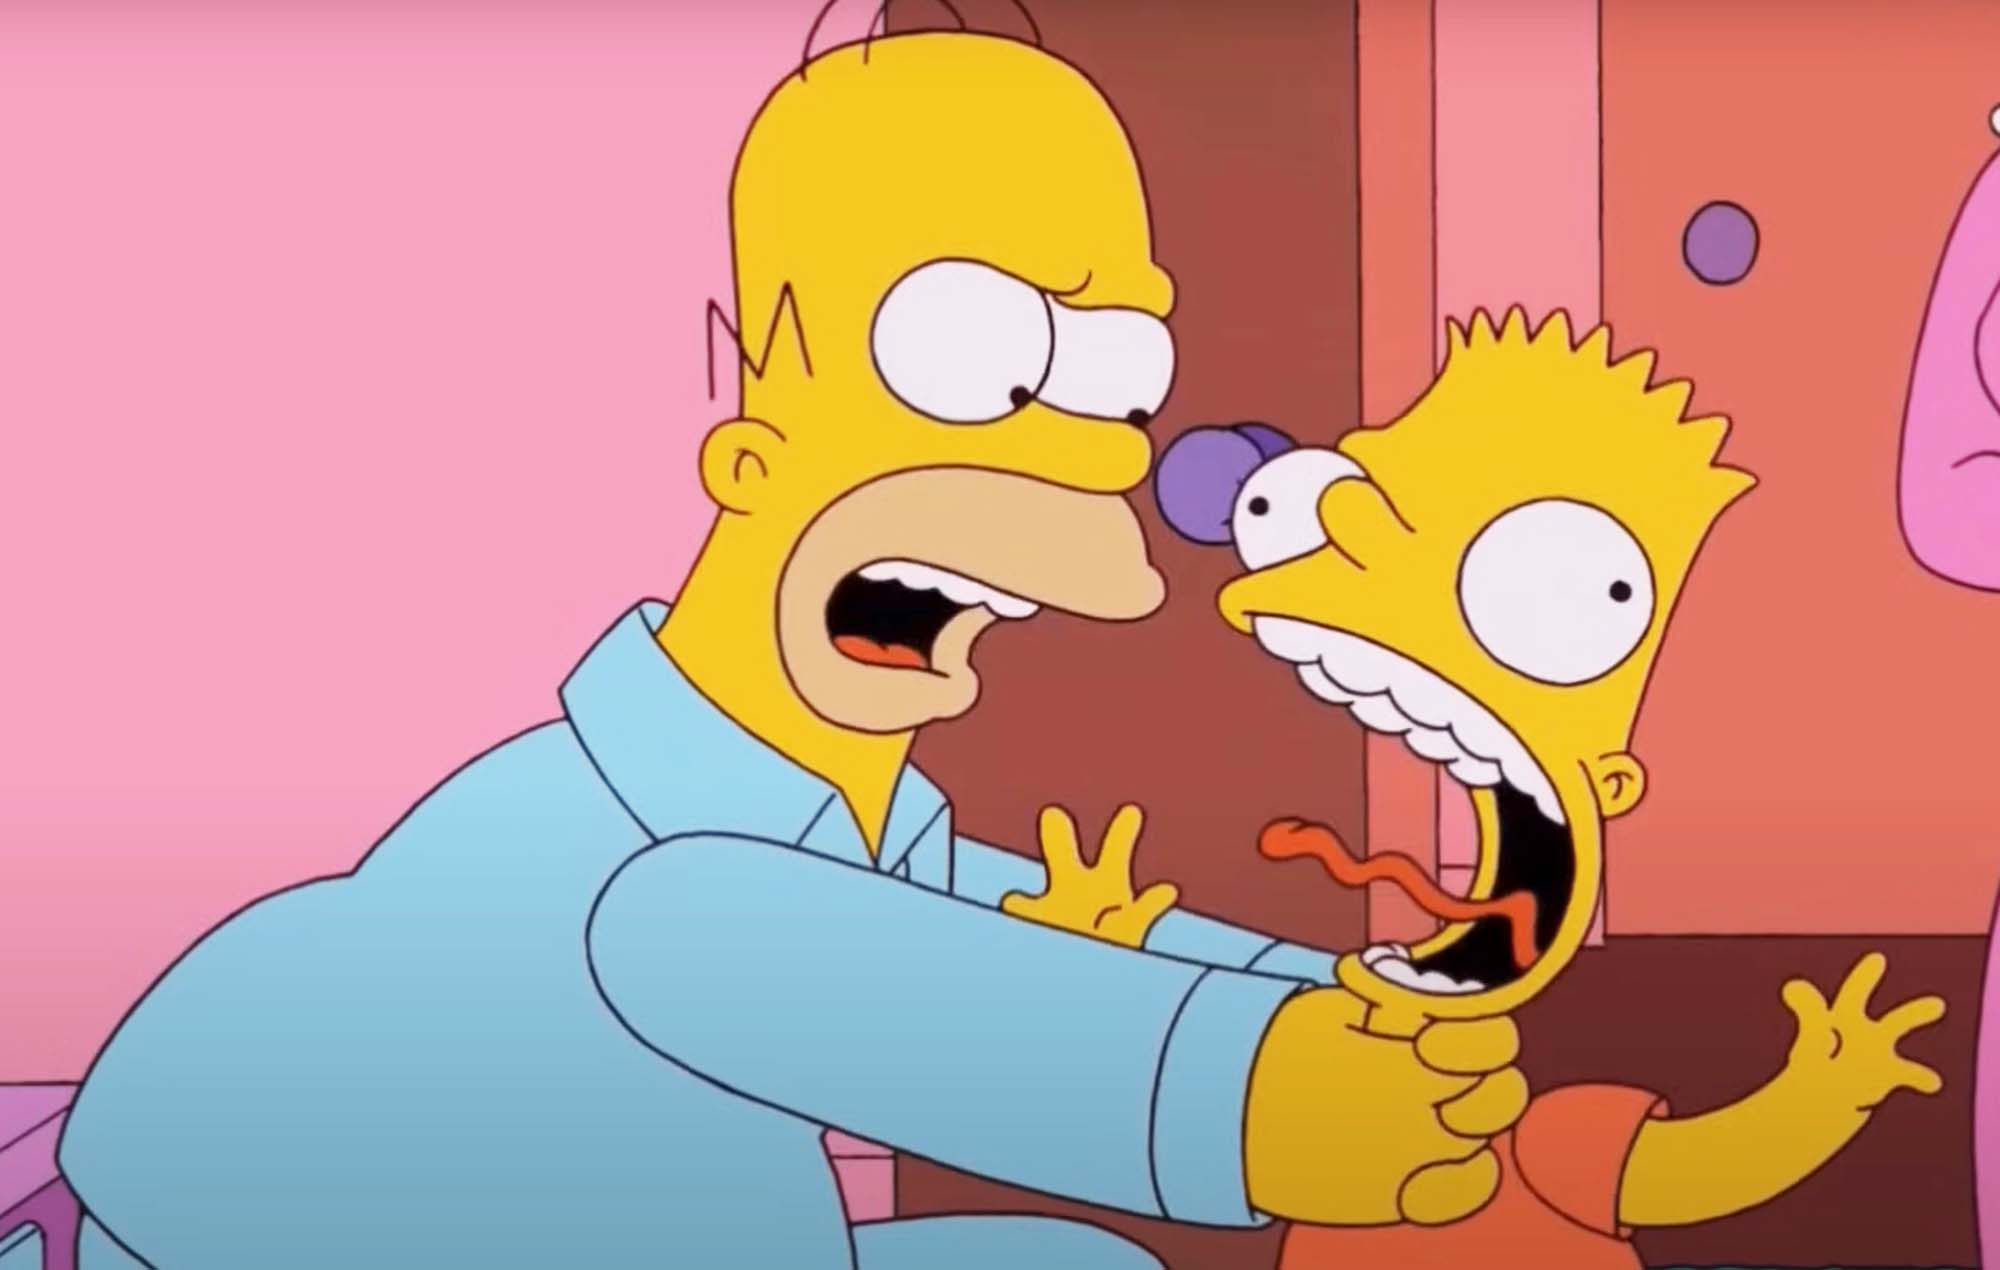 Homer Simpson will continue to strangle Bart after all, says ‘The Simpsons’ co-creator James L. Brooks